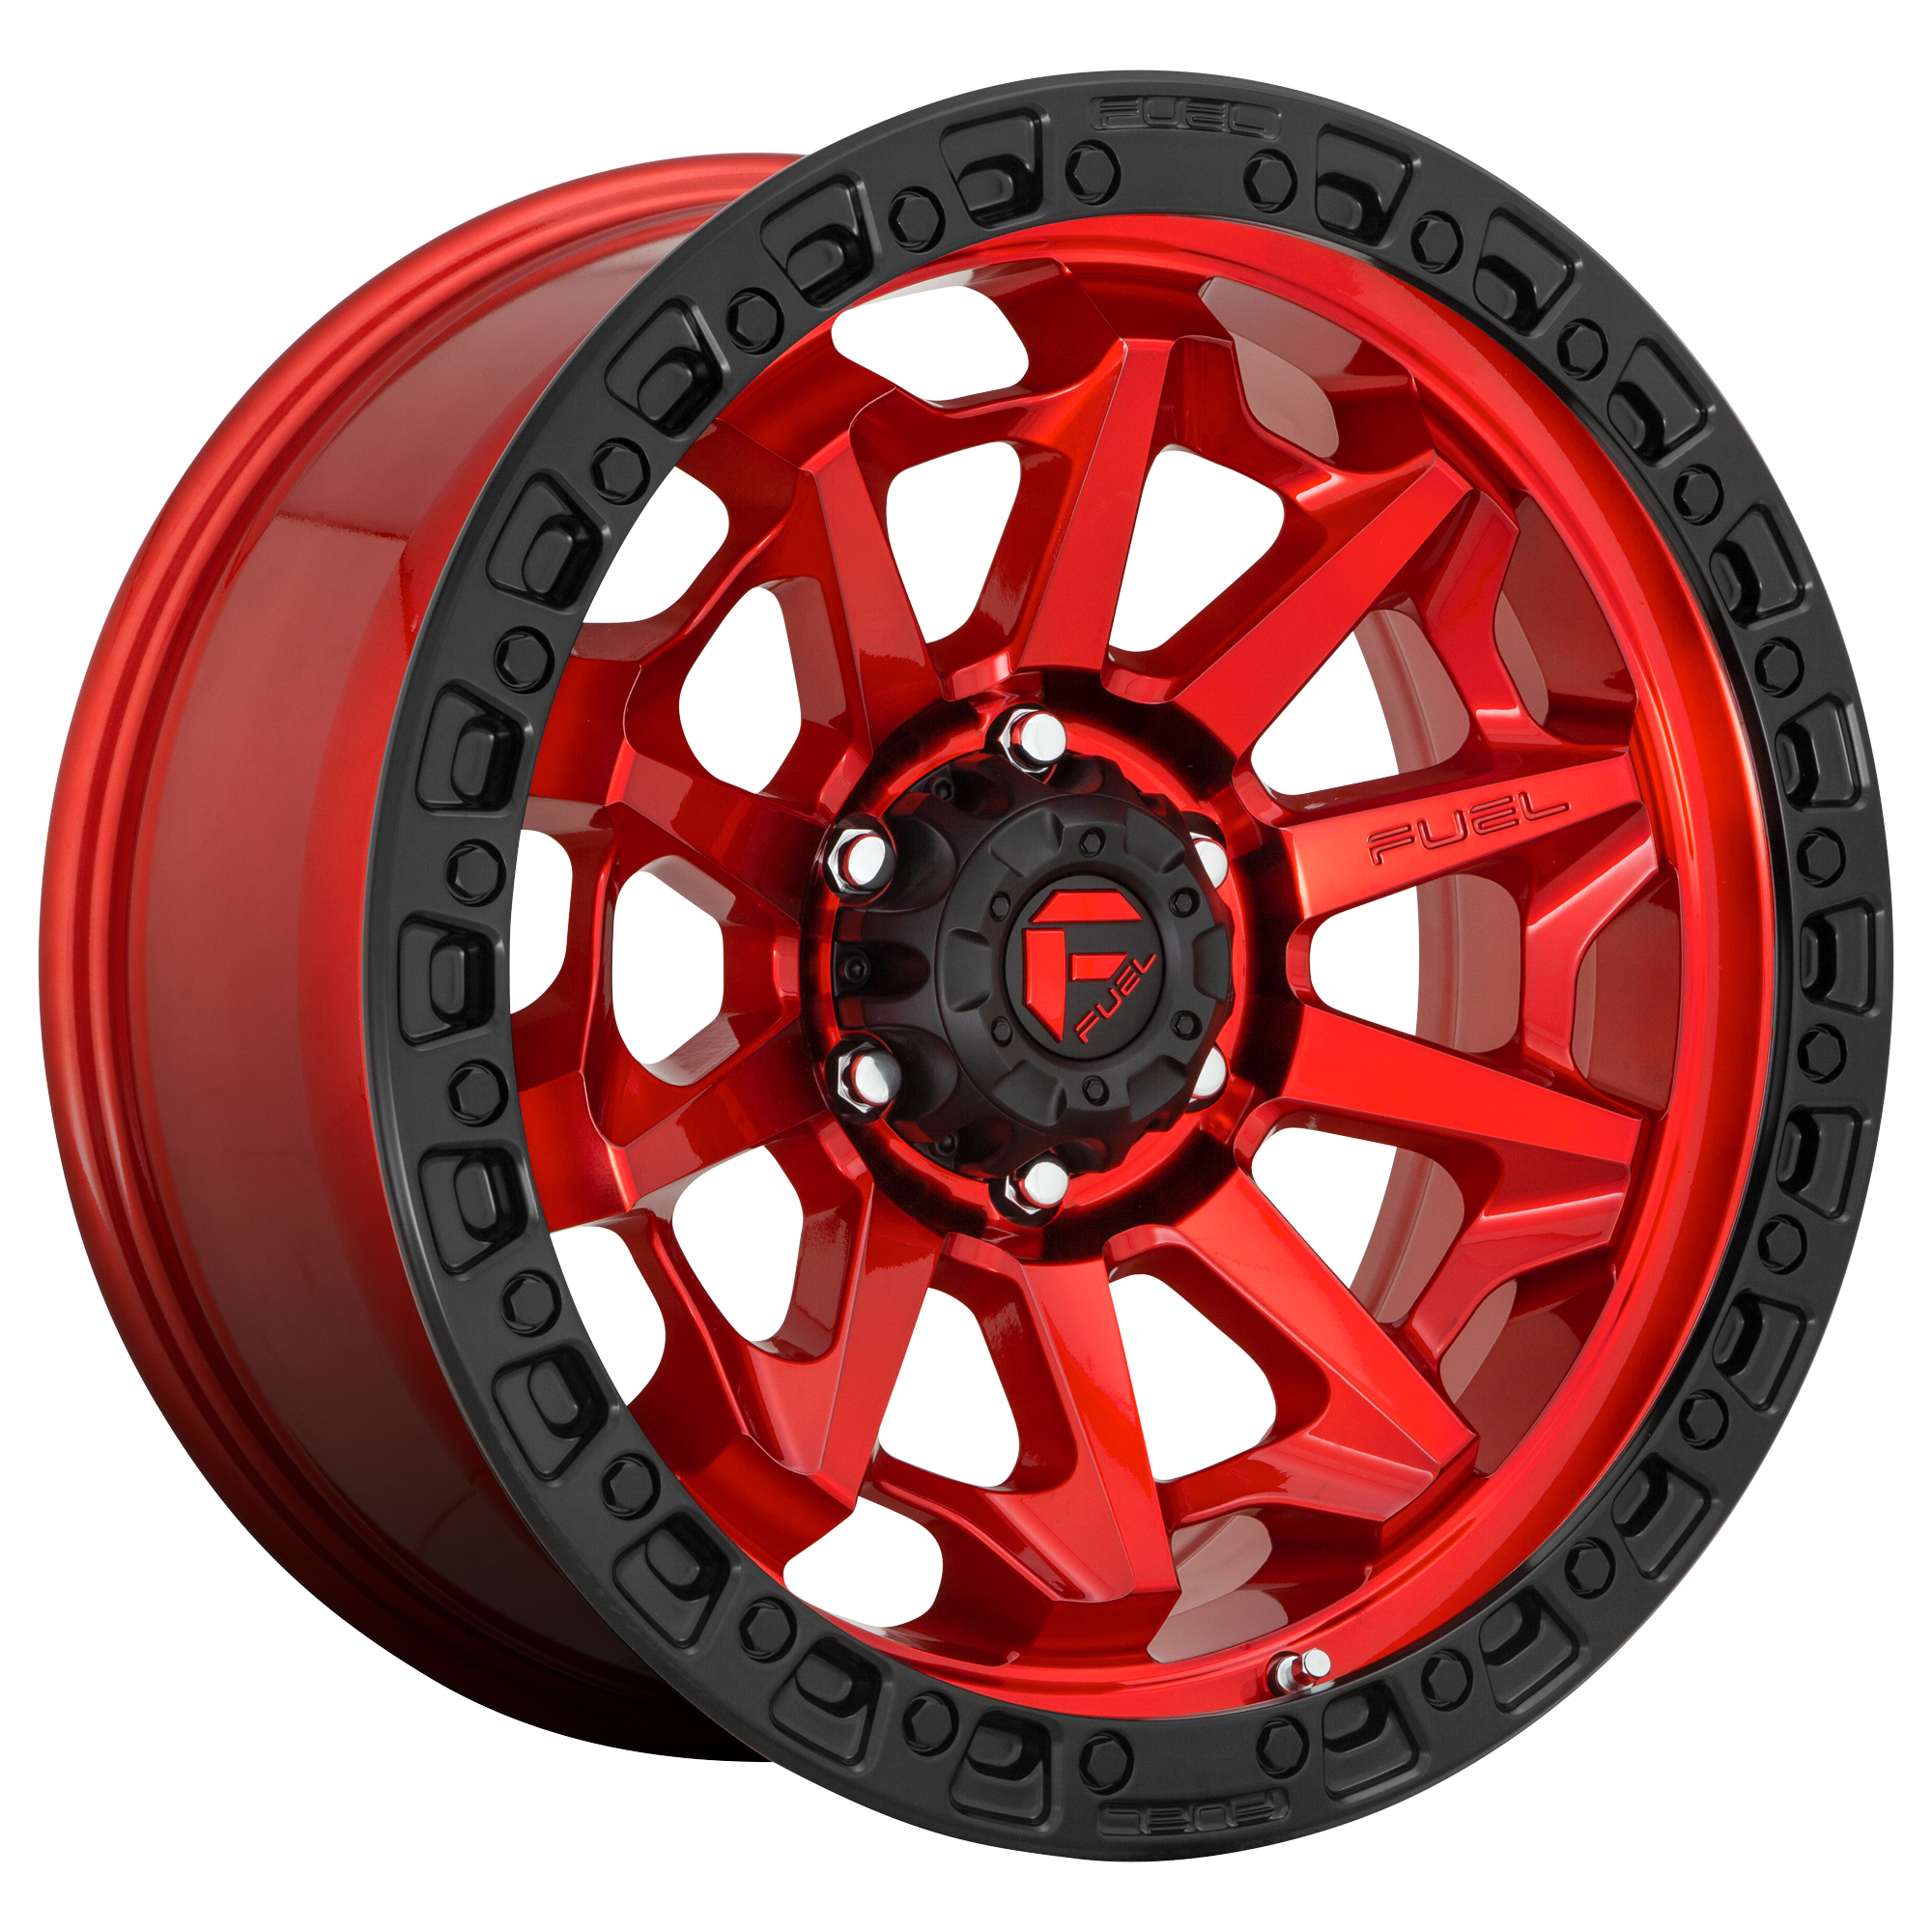 COVERT 18x9 5x127.00 CANDY RED BLACK BEAD RING (1 mm) - Tires and Engine Performance